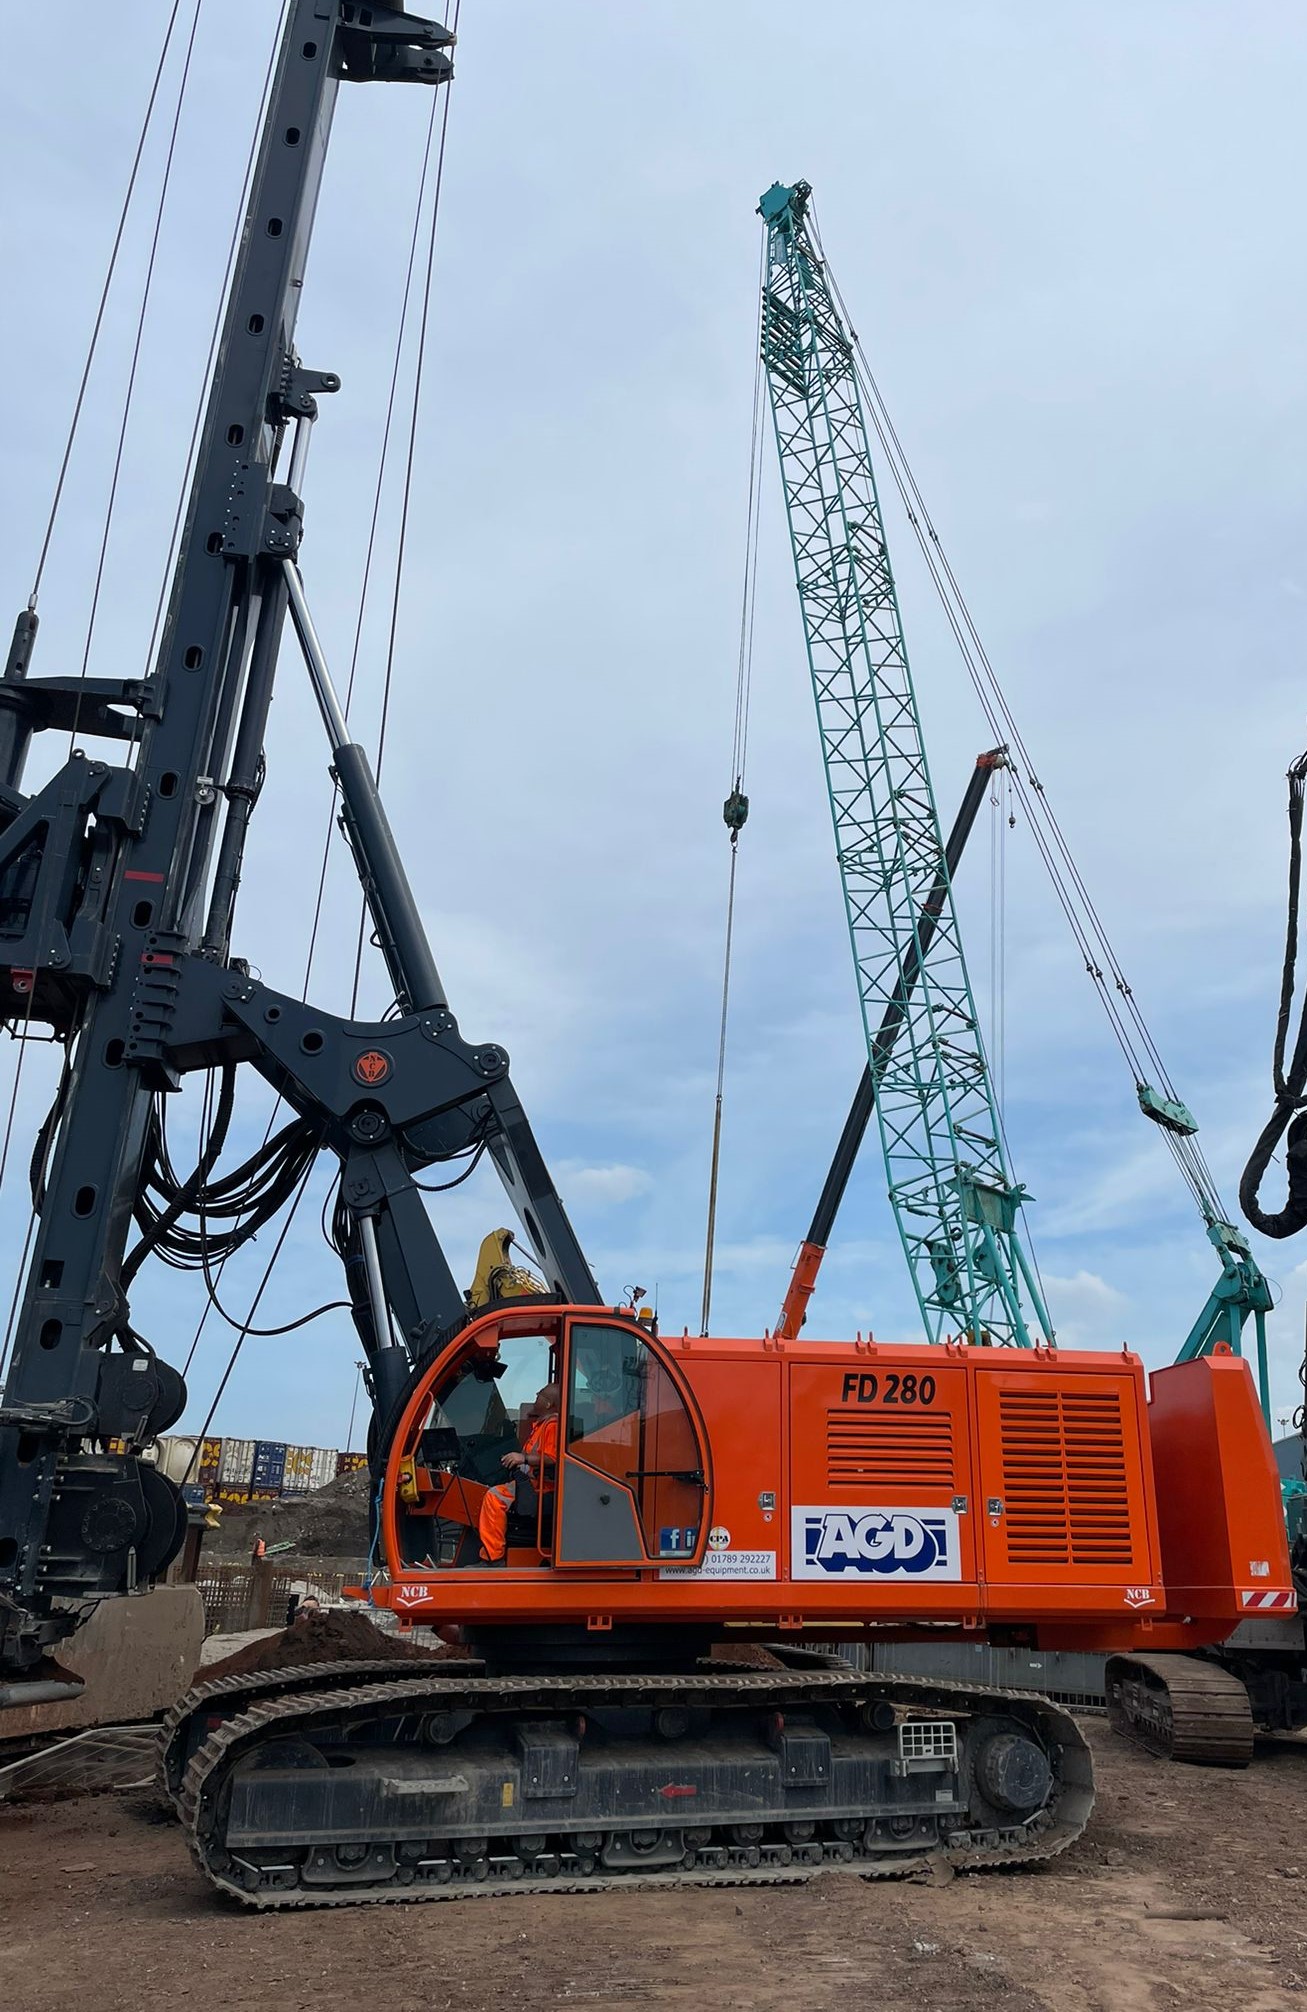 UK Providers of Rotary Bored Piling Rig Hire